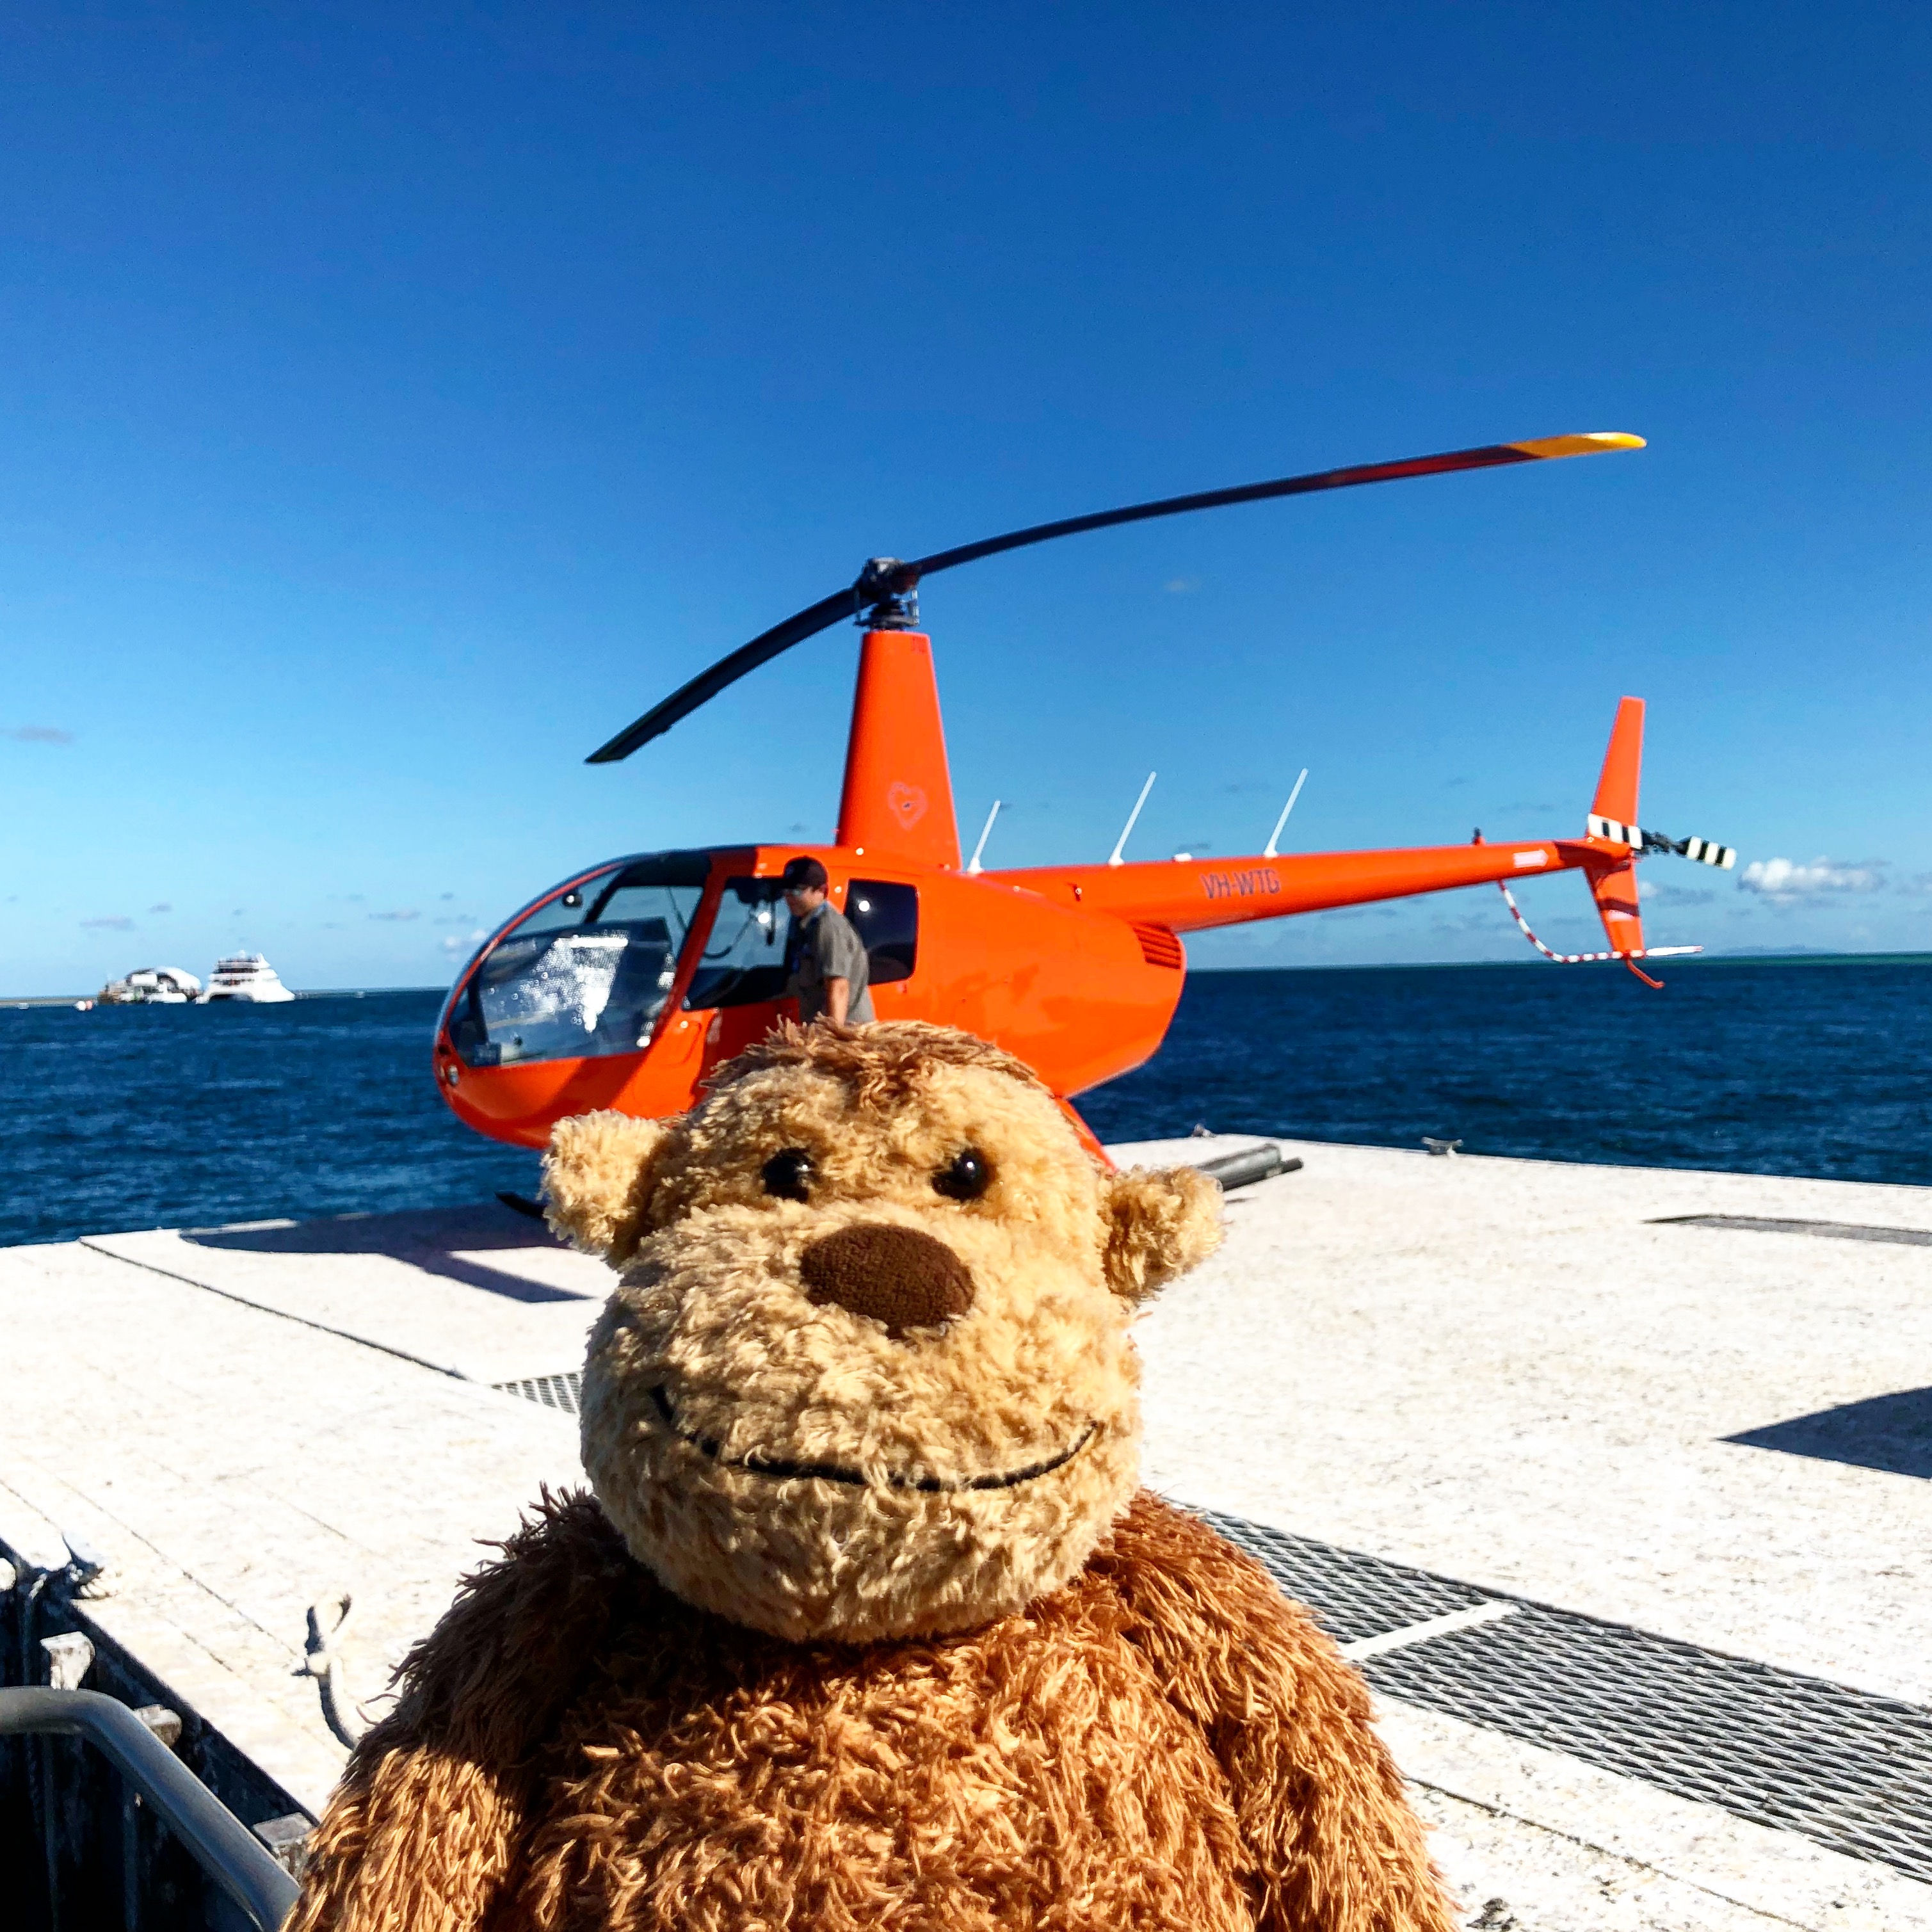 a stuffed animal on a dock with a helicopter in the background